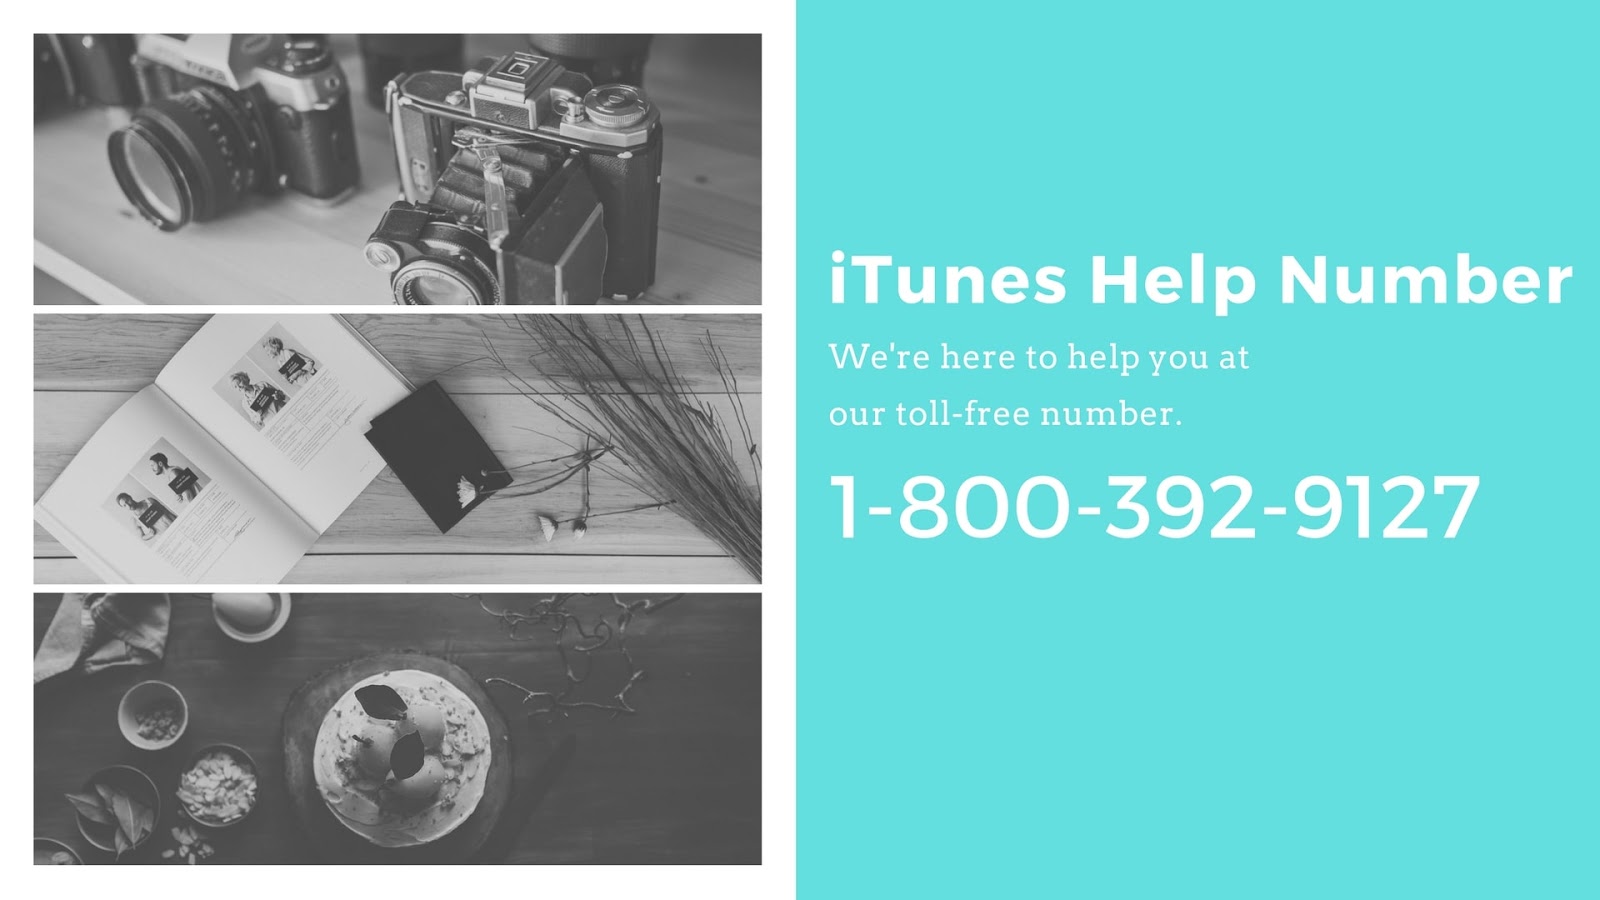 How To Connect To Itunes Store With The Help Of Itunes Help Number